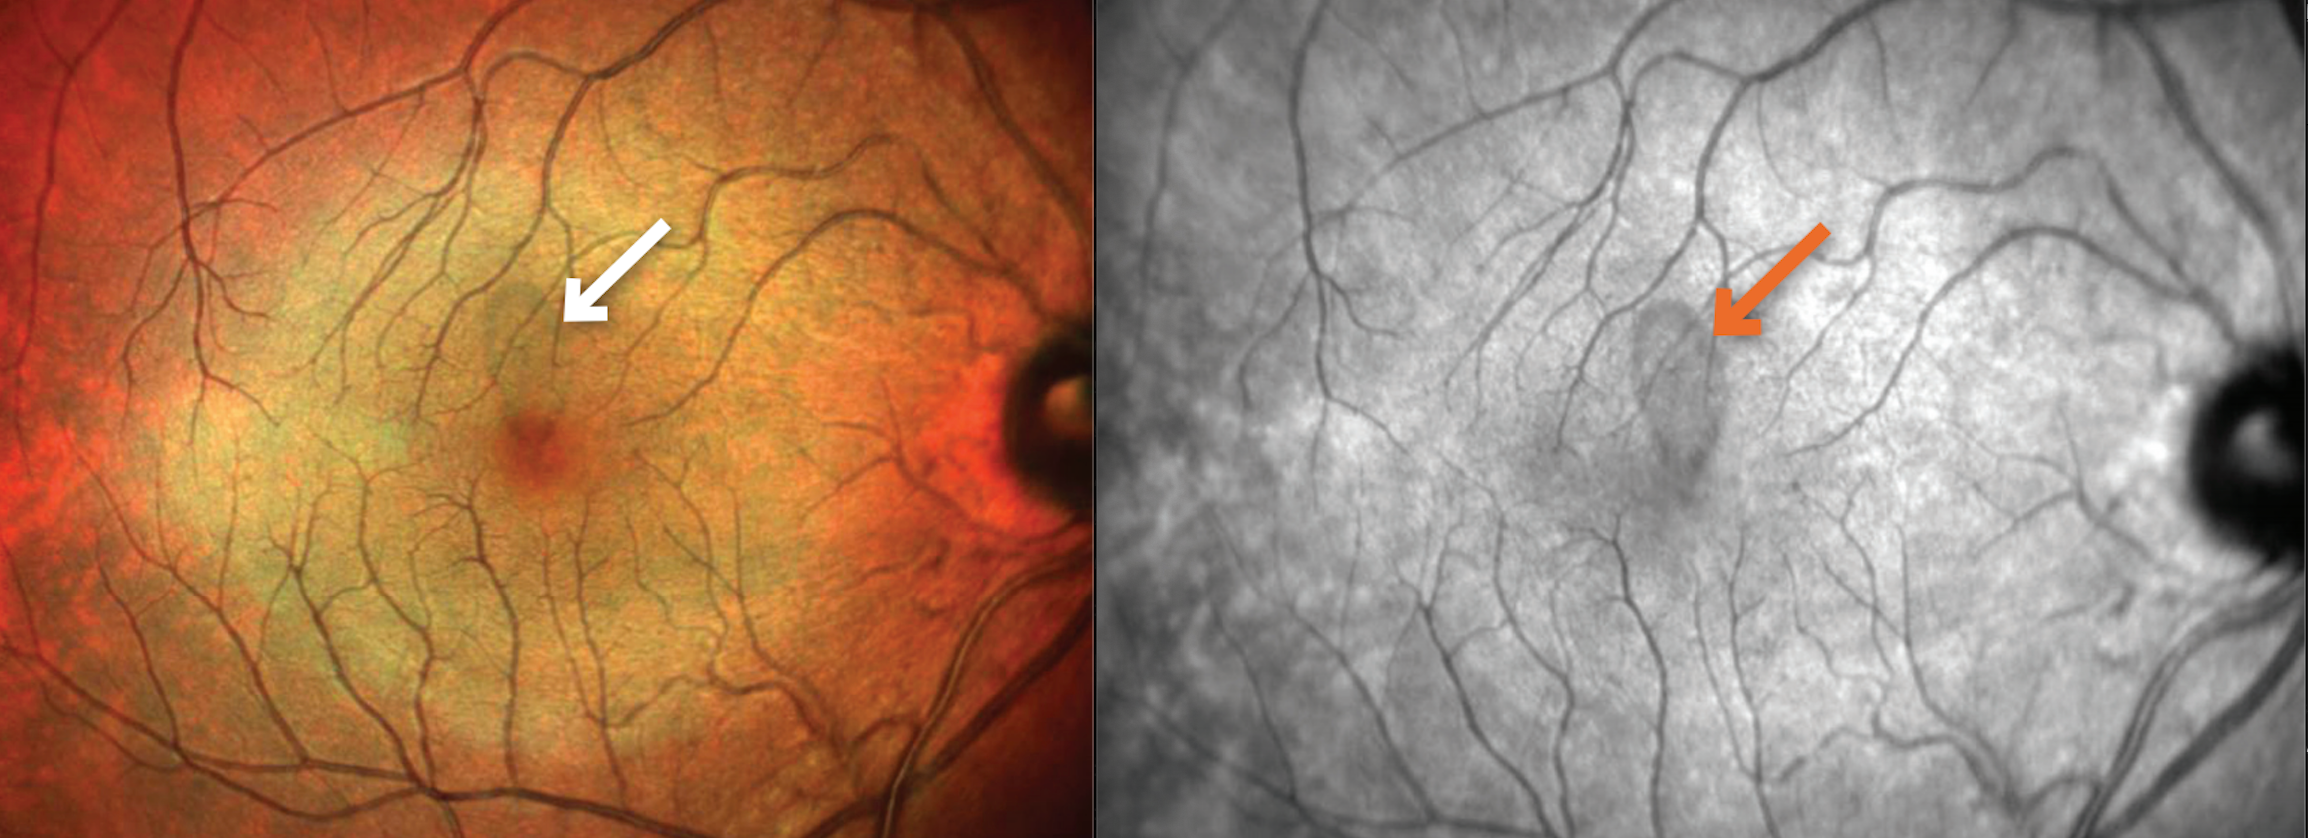 (FIGURE 1) A patient with acute macular neuroretinopathy in the right eye while taking fingolimod. There is subtle petaloid-shaped discoloration, superior to the fovea on multicolor image, and corresponding abnormal signal on near infrared image. (Photos courtesy of Bradley T. Smith, MD)